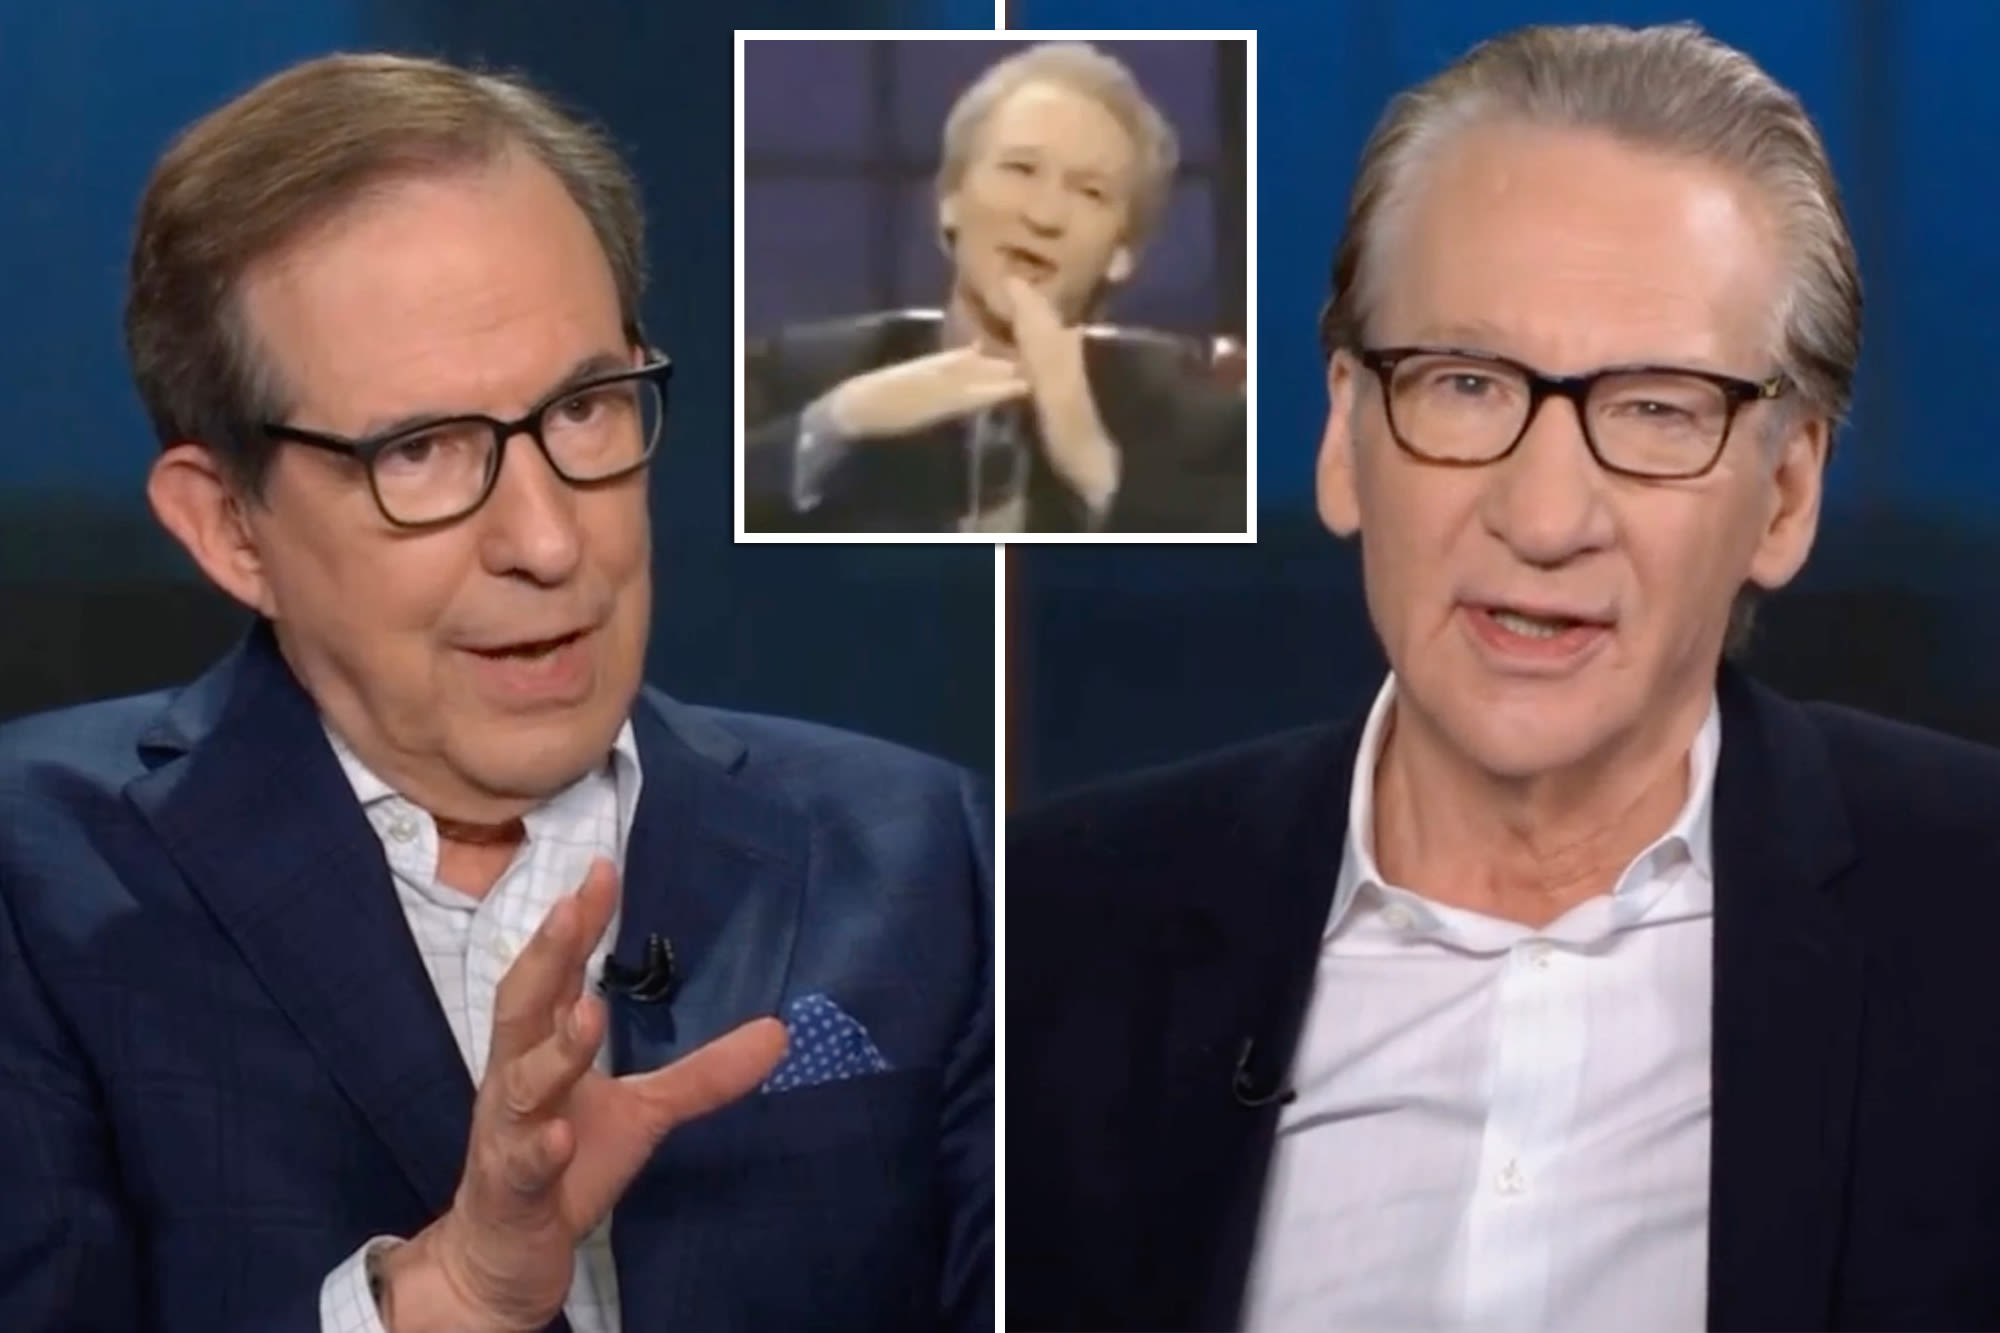 Bill Maher claps back at CNN’s Chris Wallace for bringing up 9/11 comments: ‘This is so old’